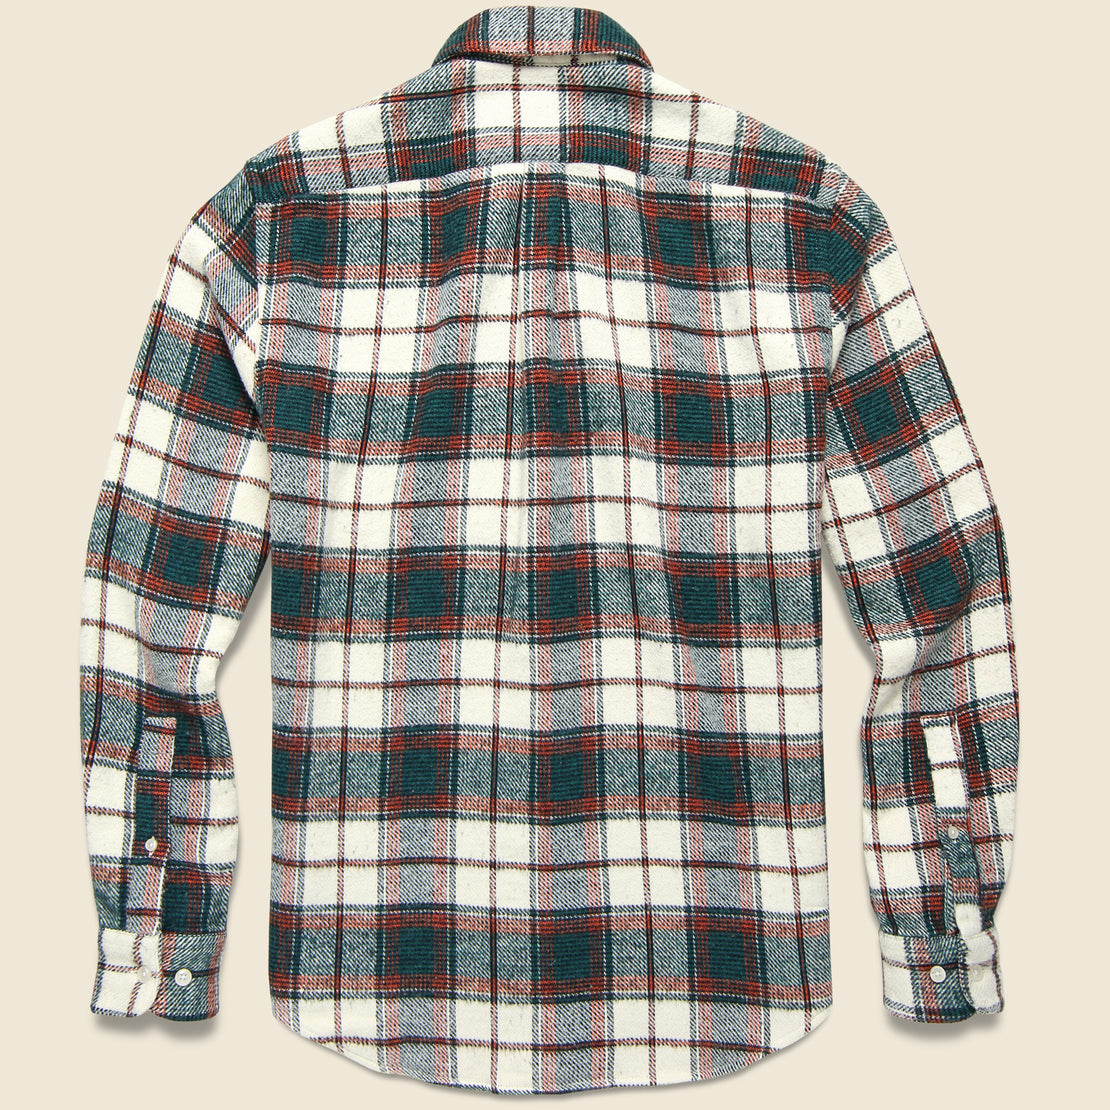 Saint Patrick Check Shirt - Green/Red/Cream - Portuguese Flannel - STAG Provisions - Tops - L/S Woven - Plaid